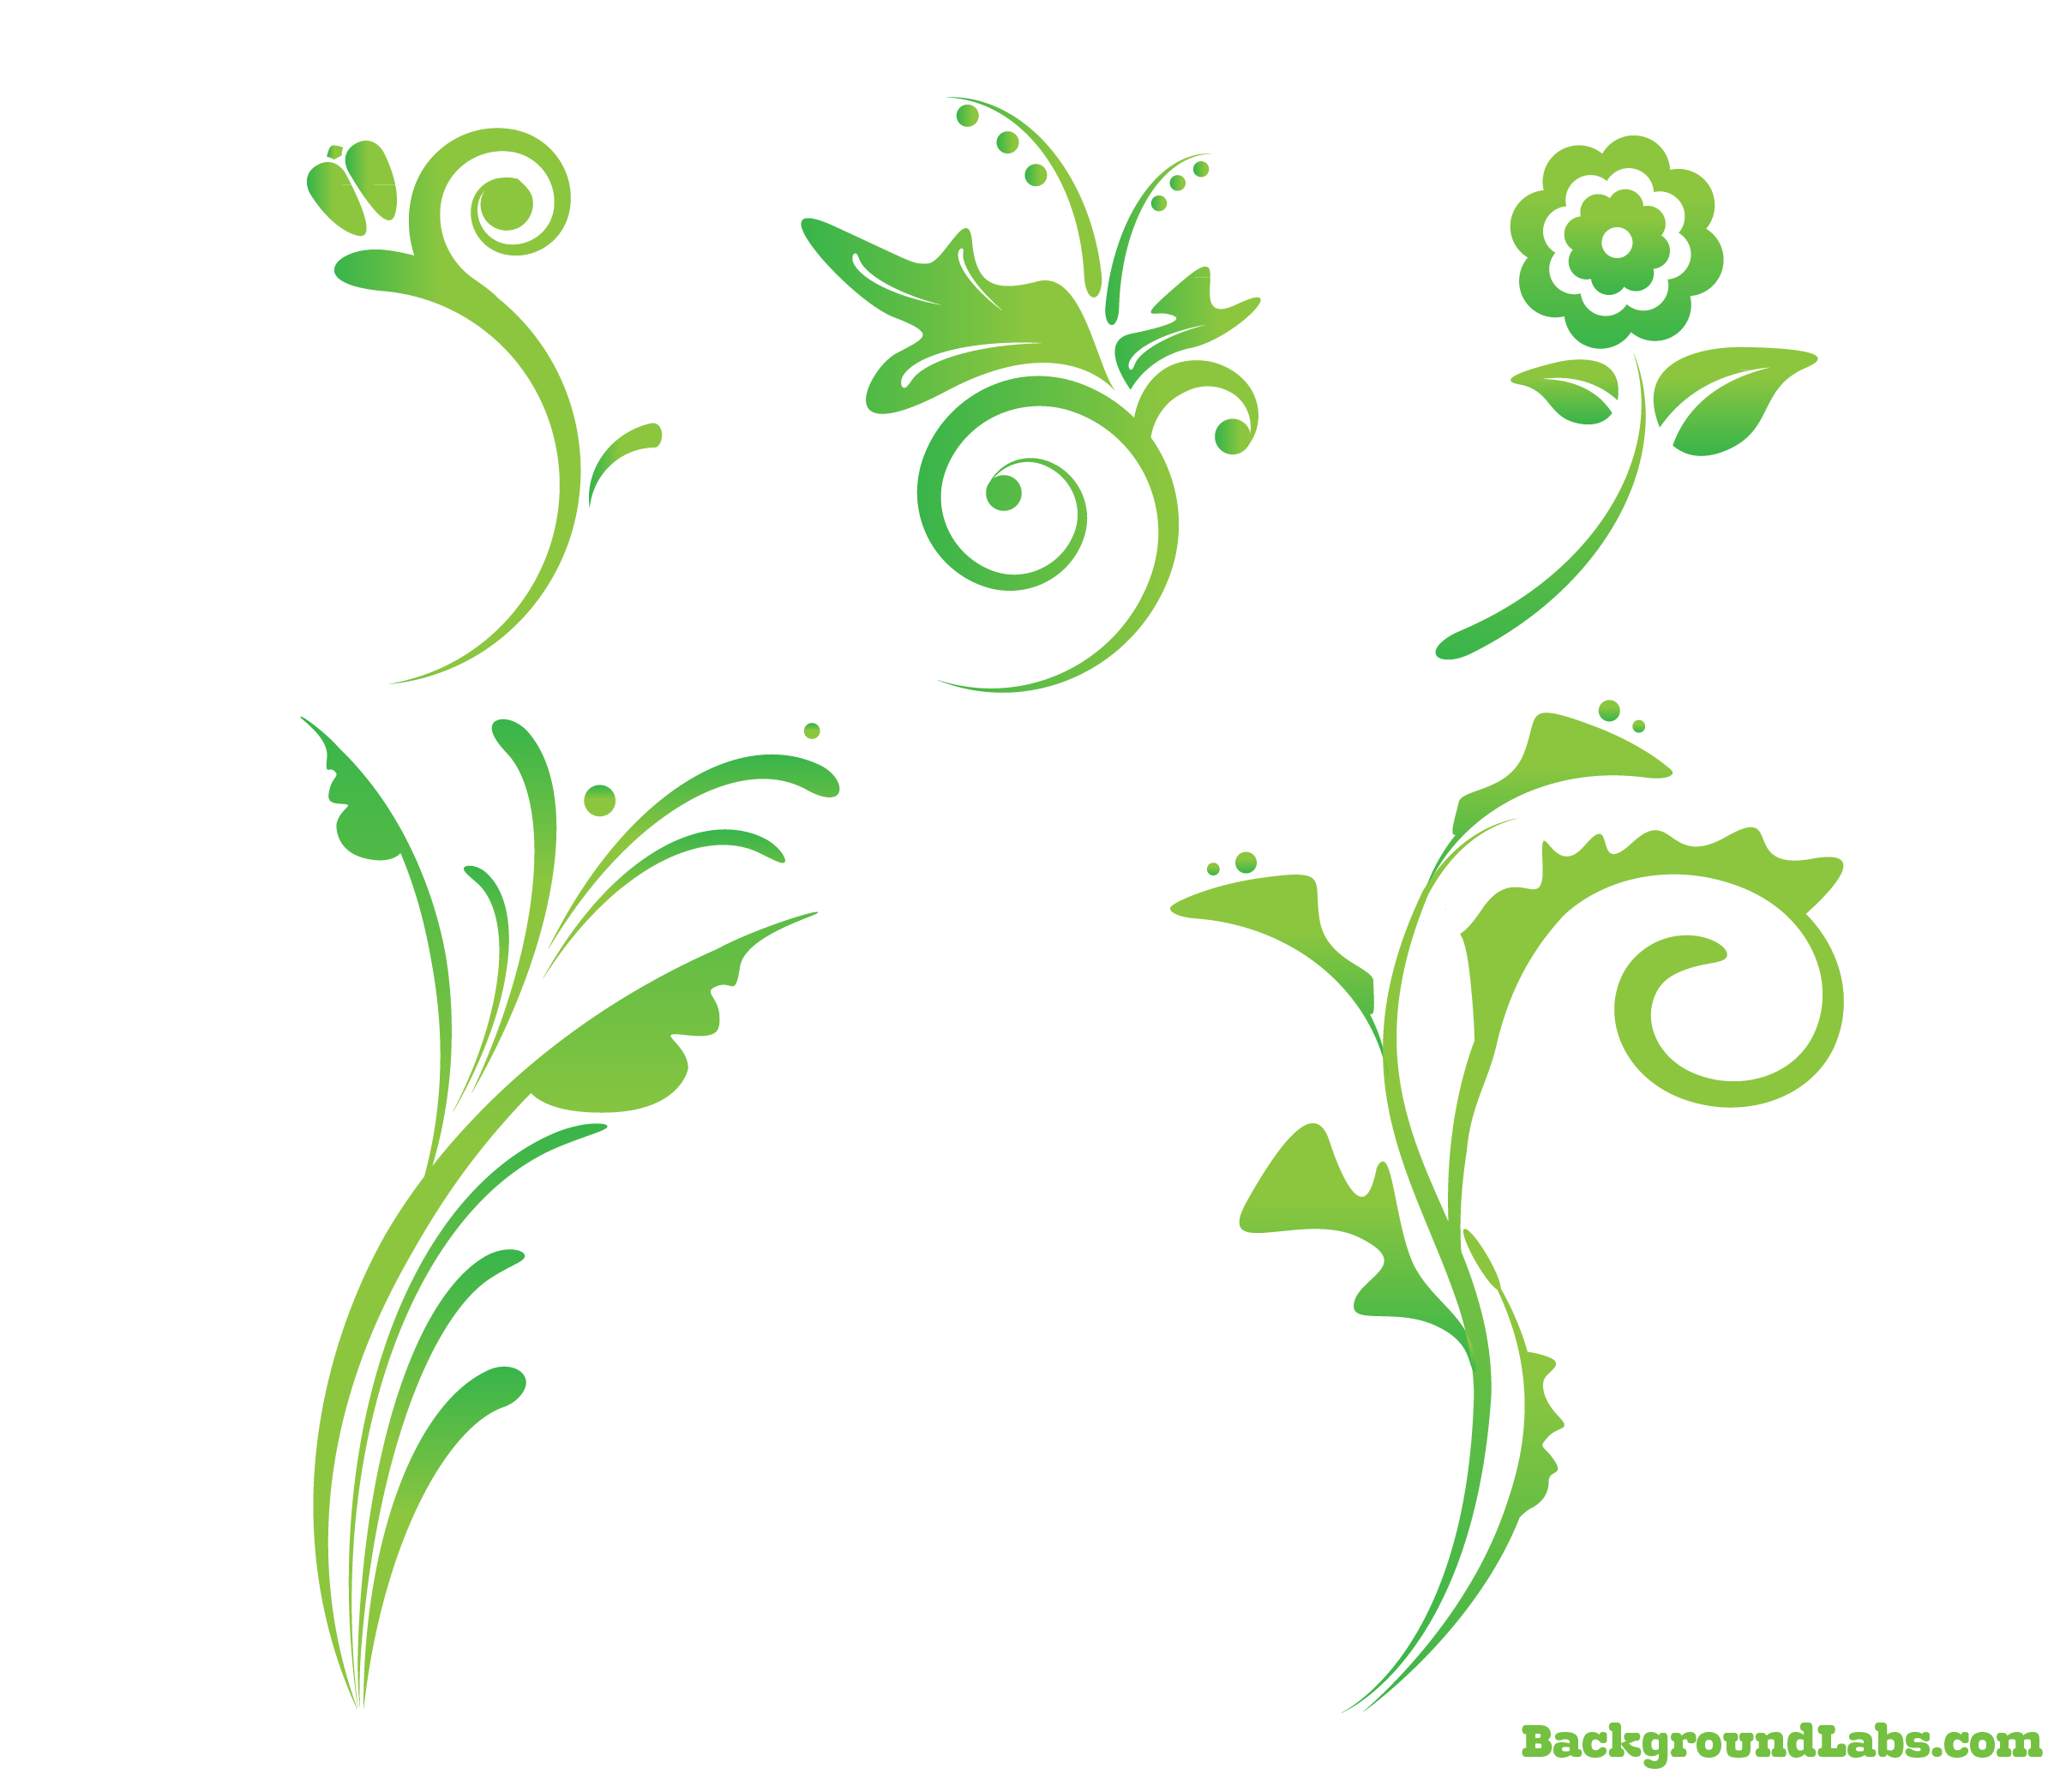 Today’s design freebie is this awesome floral vector set with 5 